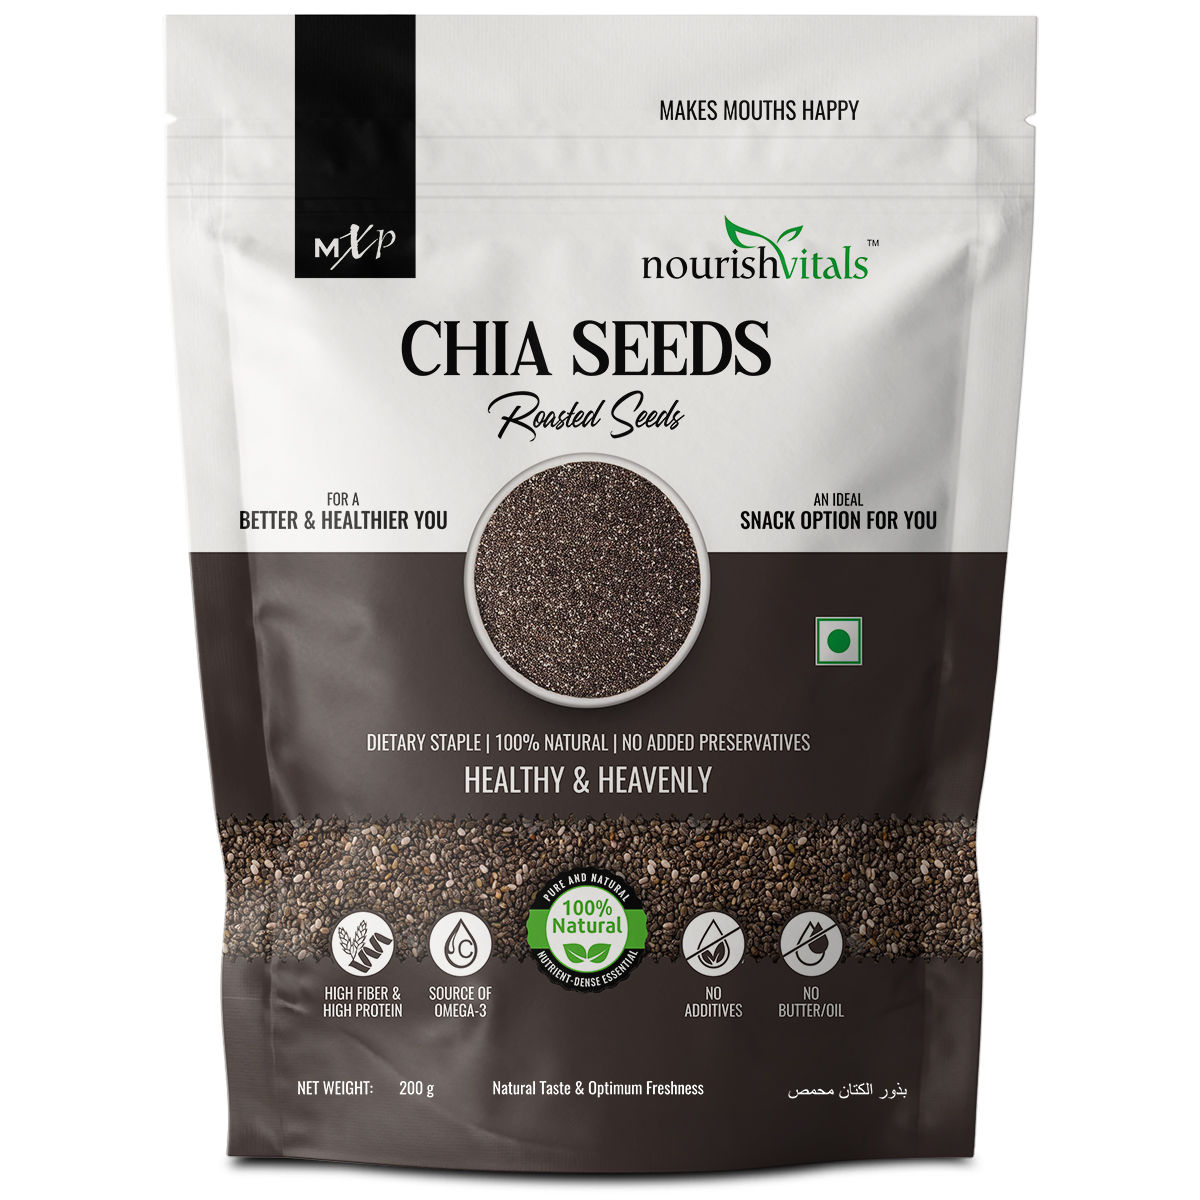 Buy Nourishvitals Chia Roasted Seeds, 200g - 100% Natural & Premium Quality, No Added Preservatives, High Fiber, High Protein, Source of Omega 3 - Purplle